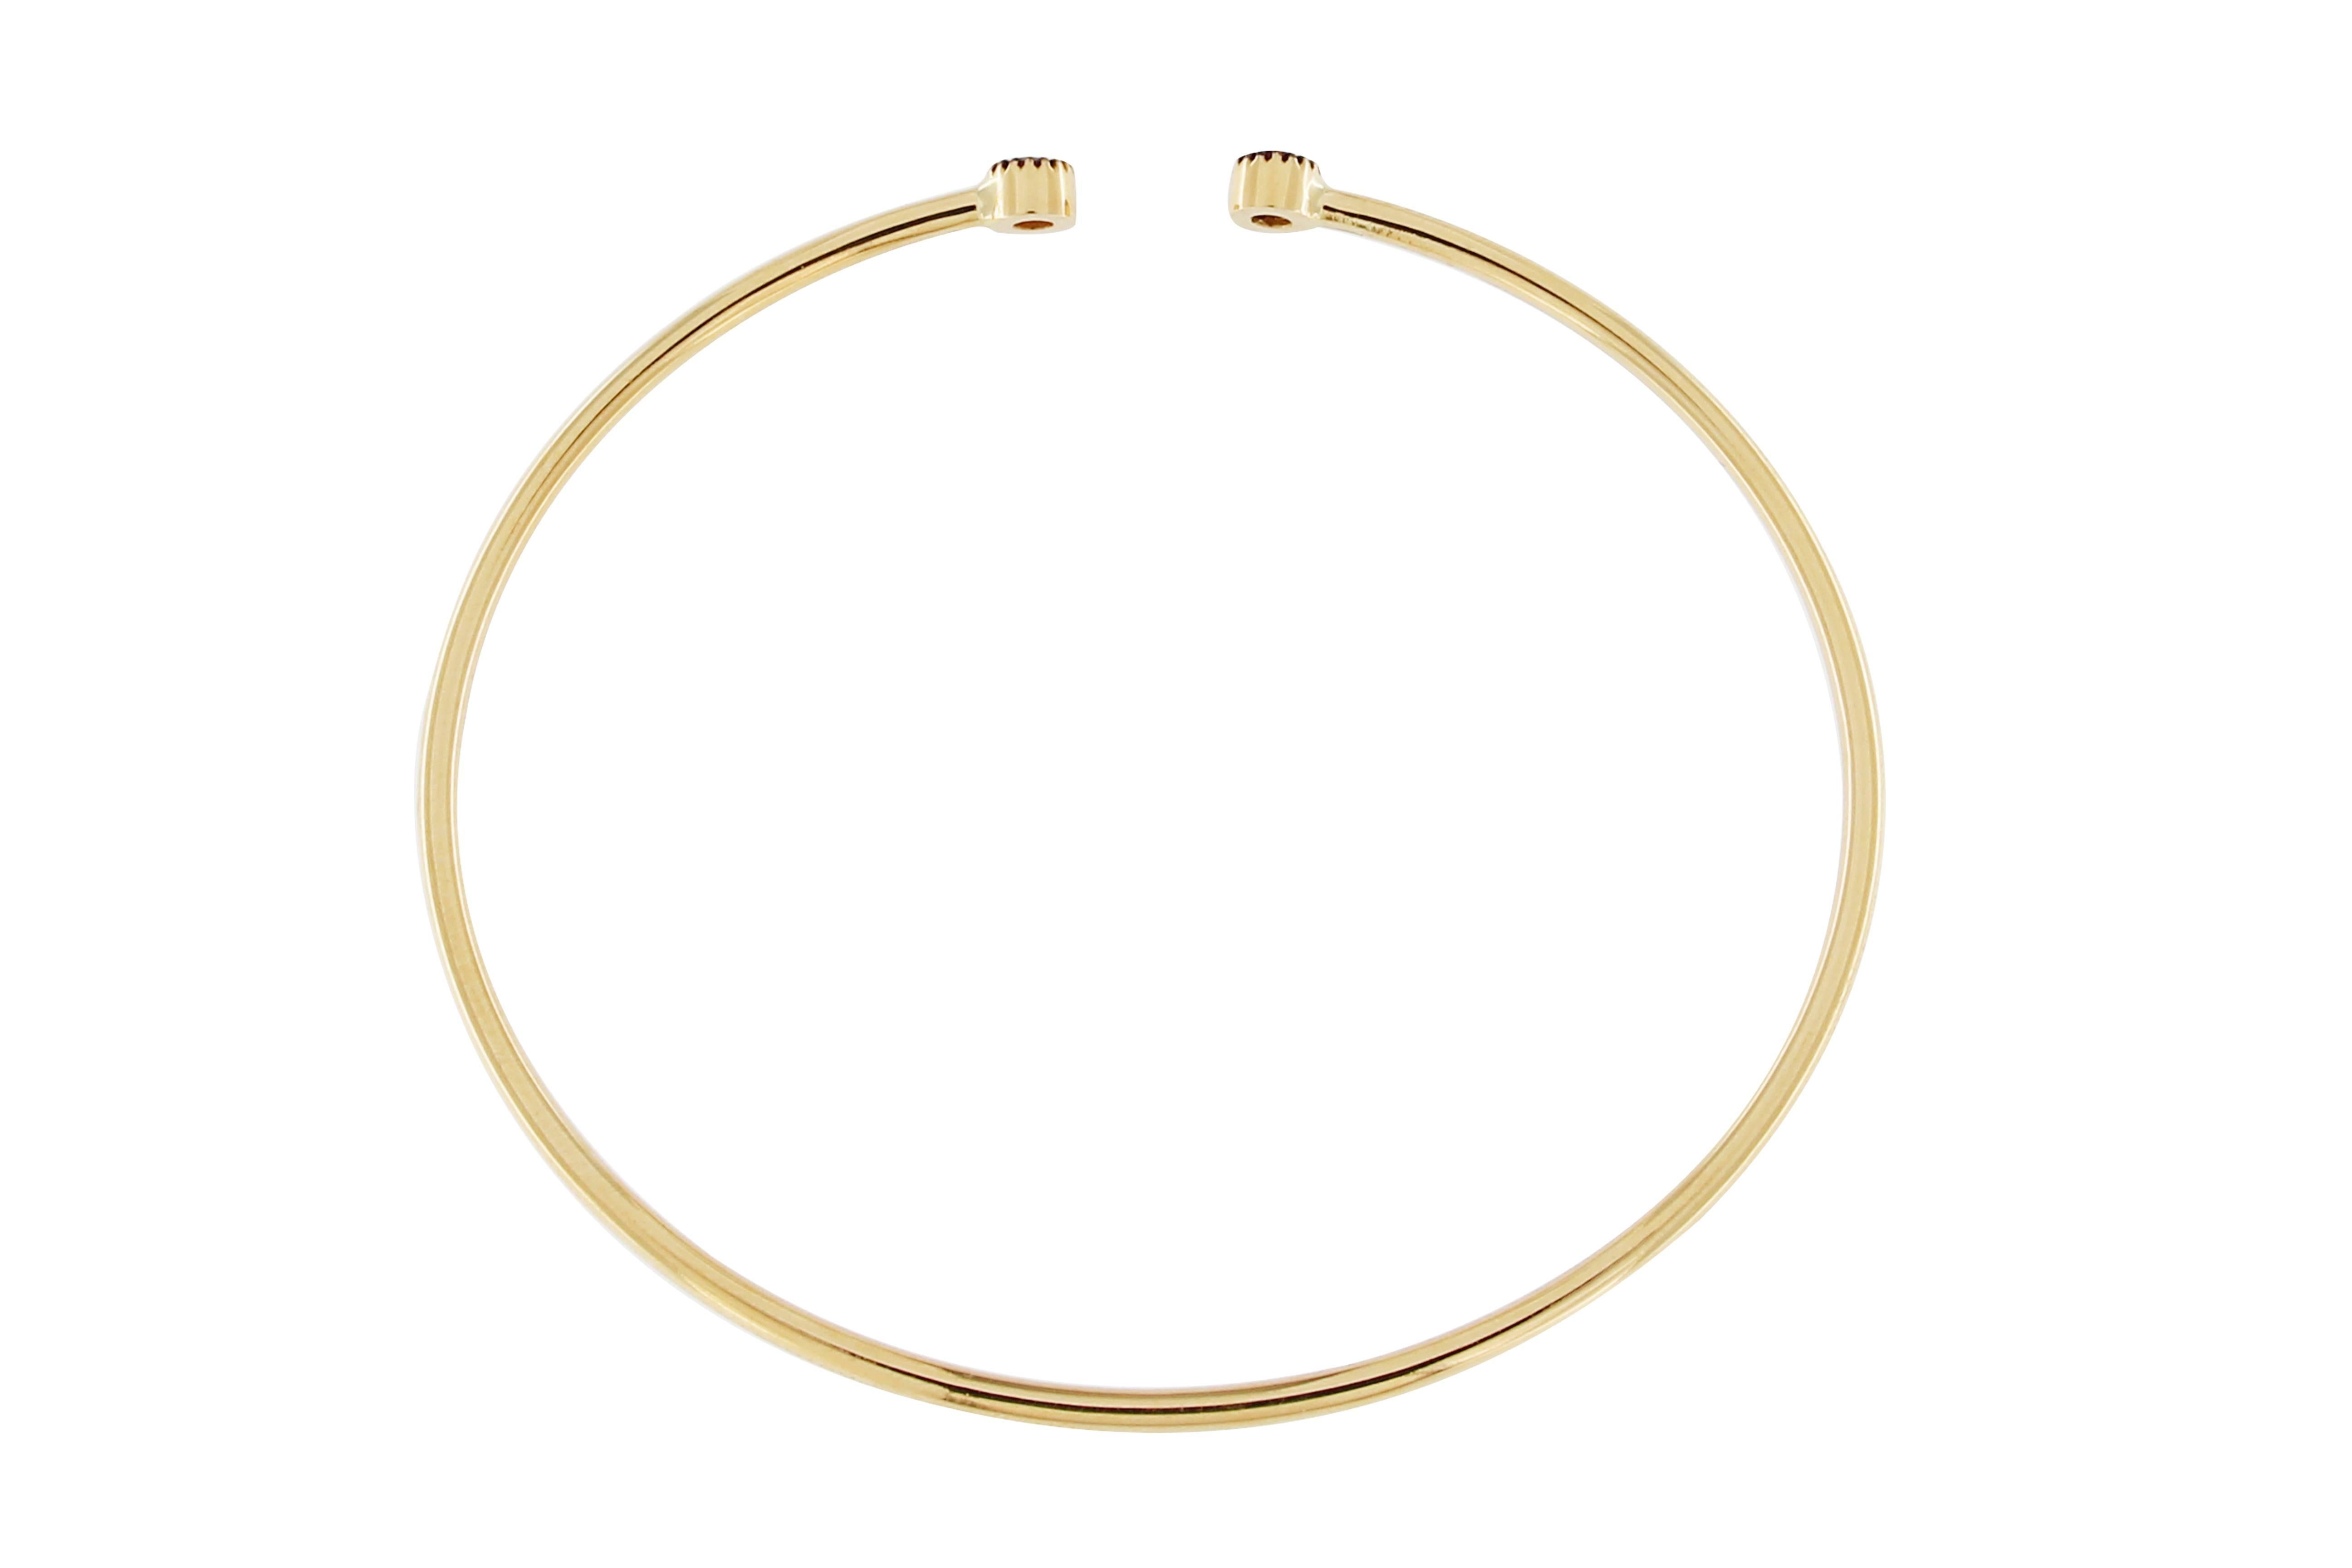 Jona design collection, hand crafted in Italy, 18 karat yellow gold bangle bracelet set with two round cut natural rubies weighing in total 0.31 carats.
Dimensions:
2.09 in. H x 2.32 in. W x 0.14 in. D
53 mm. H x 59 mm. W x 4 mm. D
All Jona jewelry